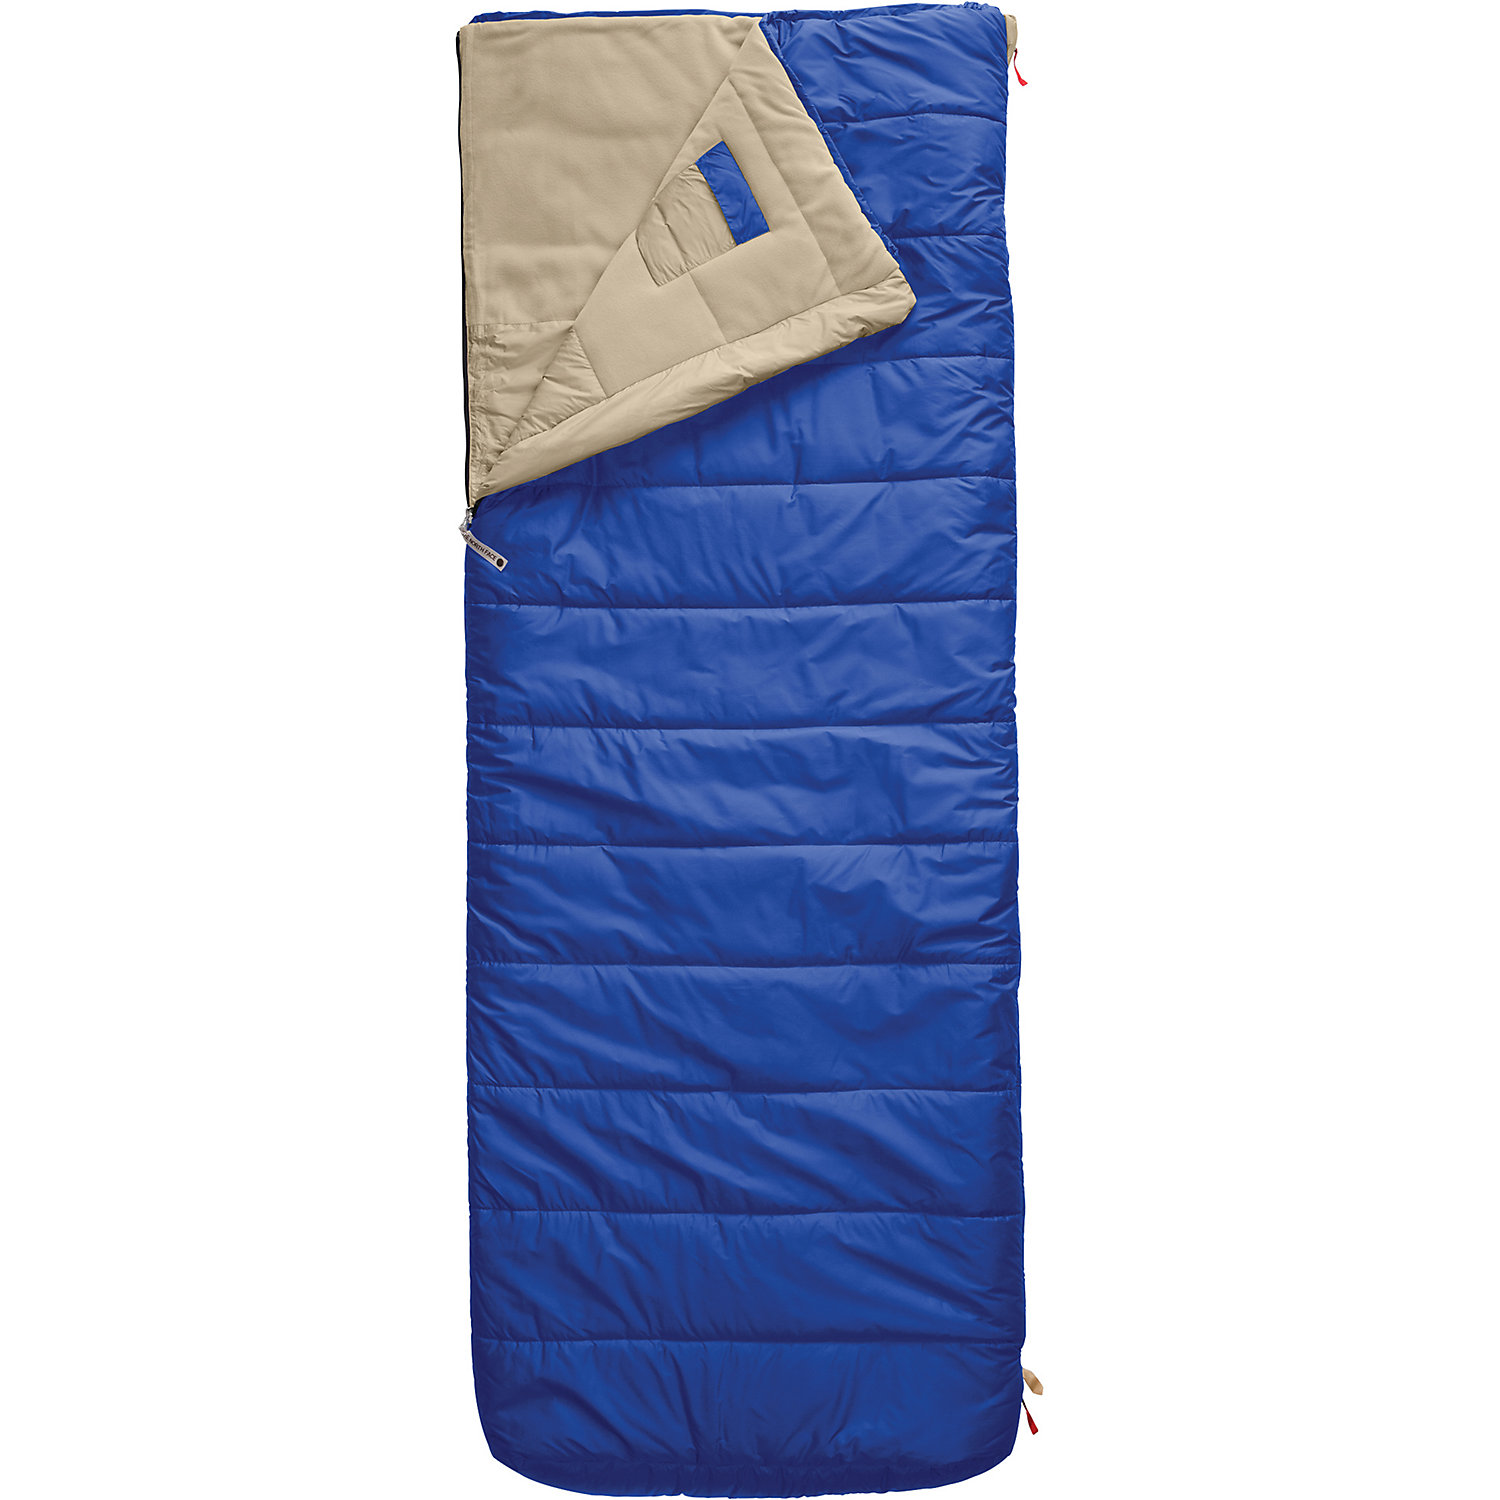 The North Face Eco Trail Bed 20 Sleeping Bag